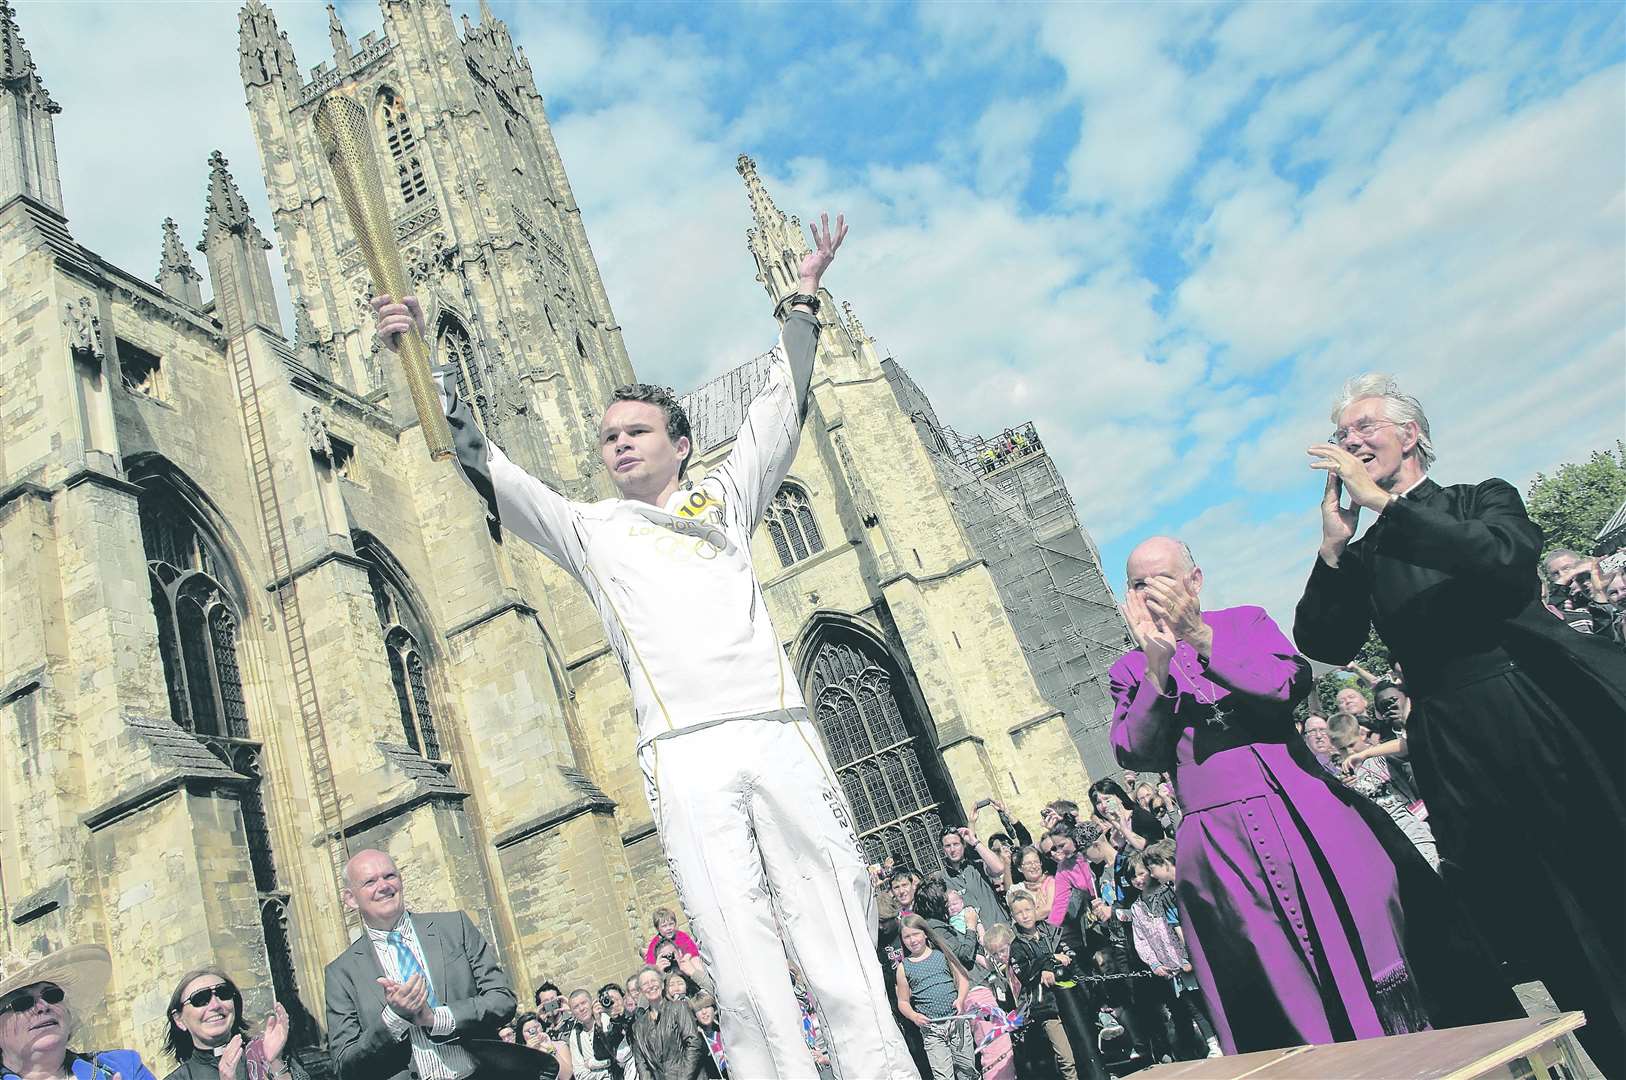 The torch arriving at Canterbury Cathedral